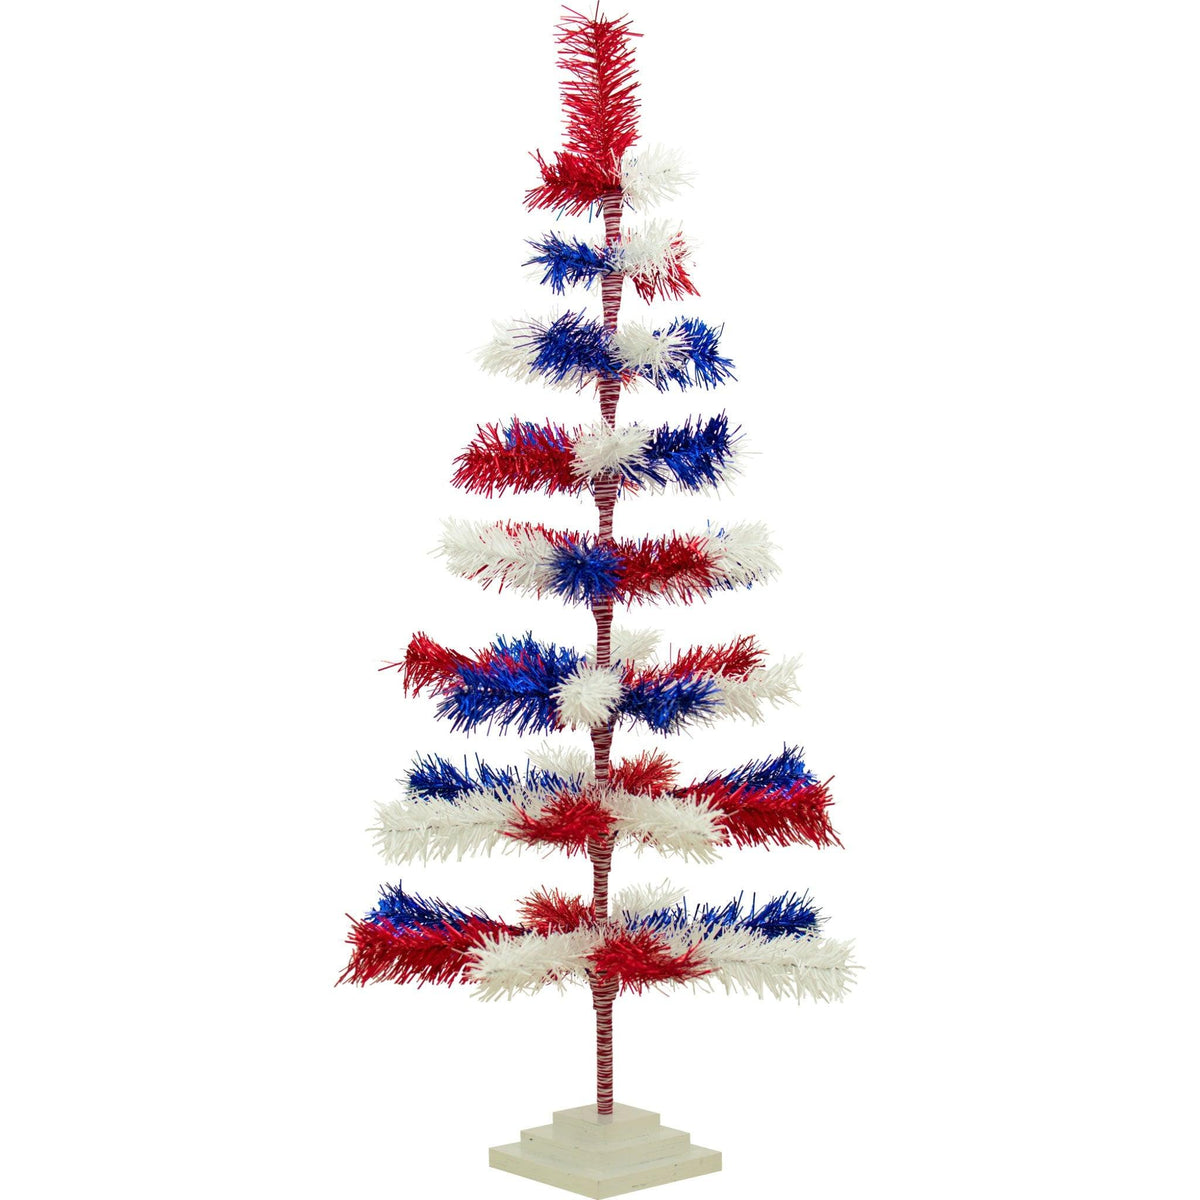 48in Tall Red White and Blue Mixed Tinsel Christmas Tree on sale at leedisplay.com.